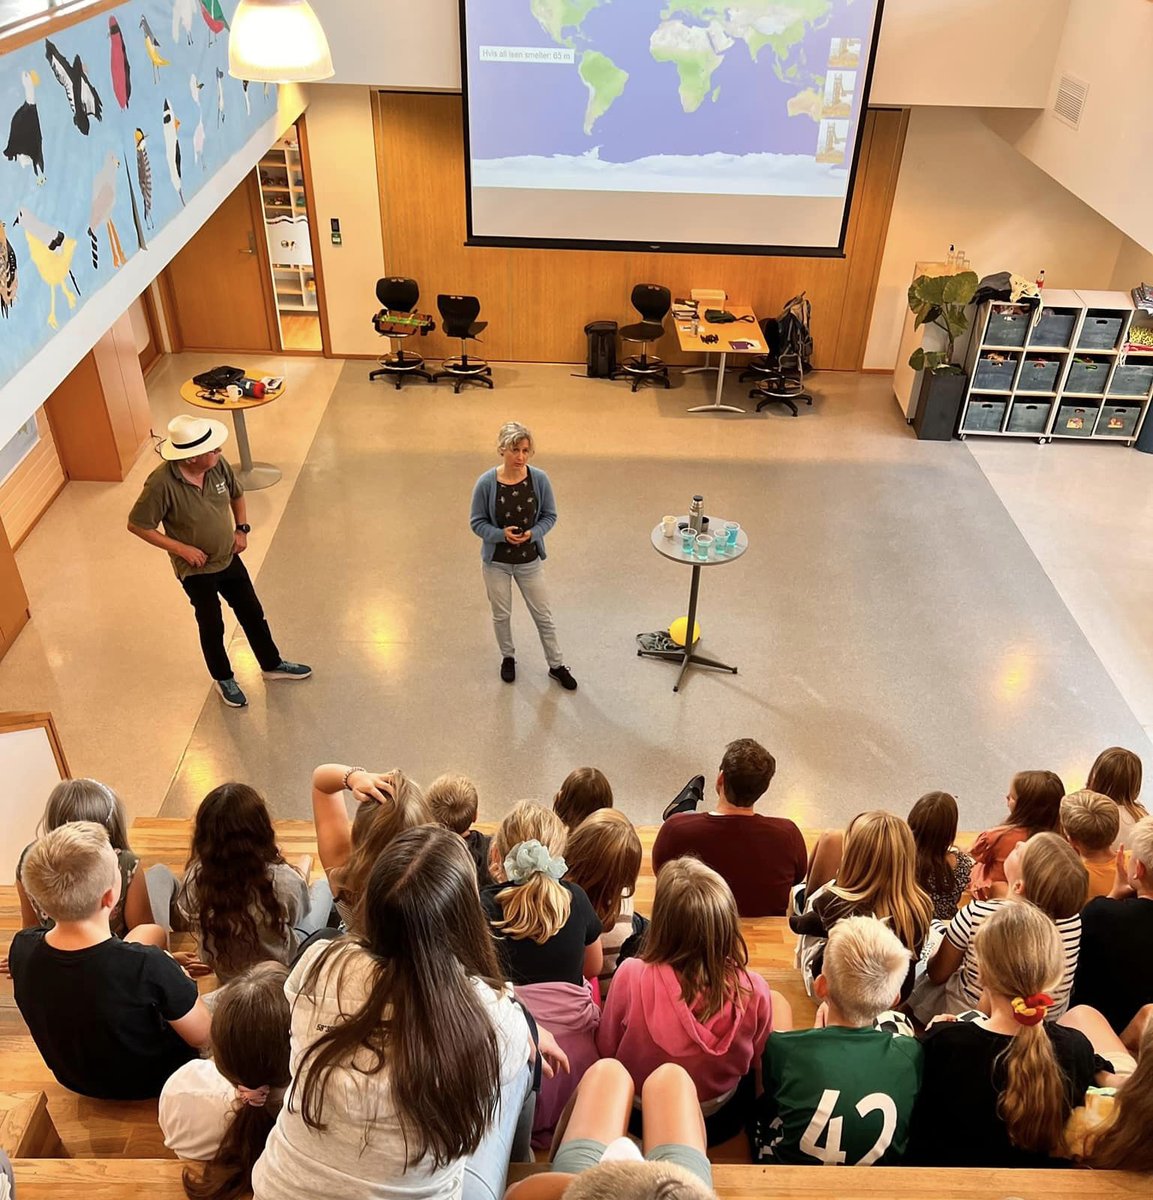 📷 Svein Østerhus (@NORCEresearch) and Kristin Richter at @arendalsuka, discussing the rising sea levels and the effect on #Antarctica with students from Arendal kommune. 🇳🇴🇪🇺